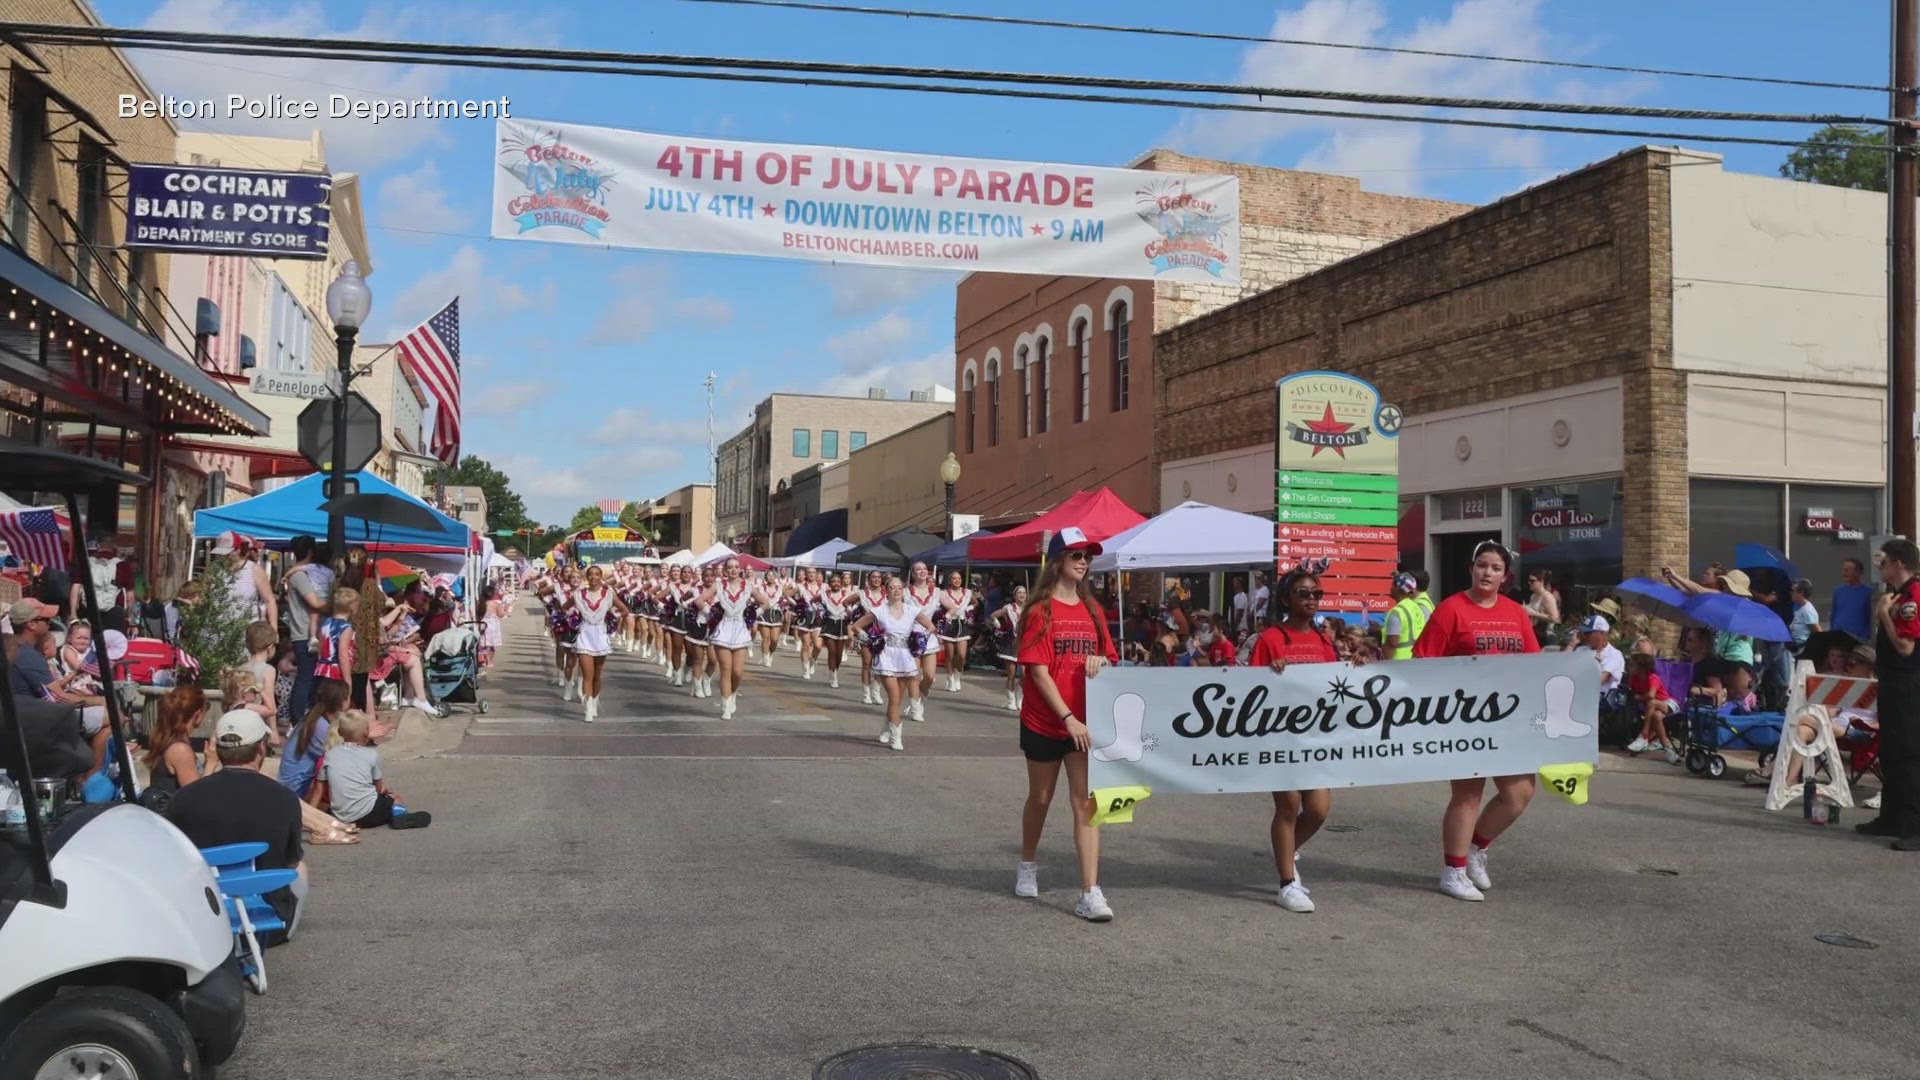 According to the Belton Chamber of Commerce, an estimated 30,000+ people line the streets to watch the annual parade as it travels through downtown Belton.